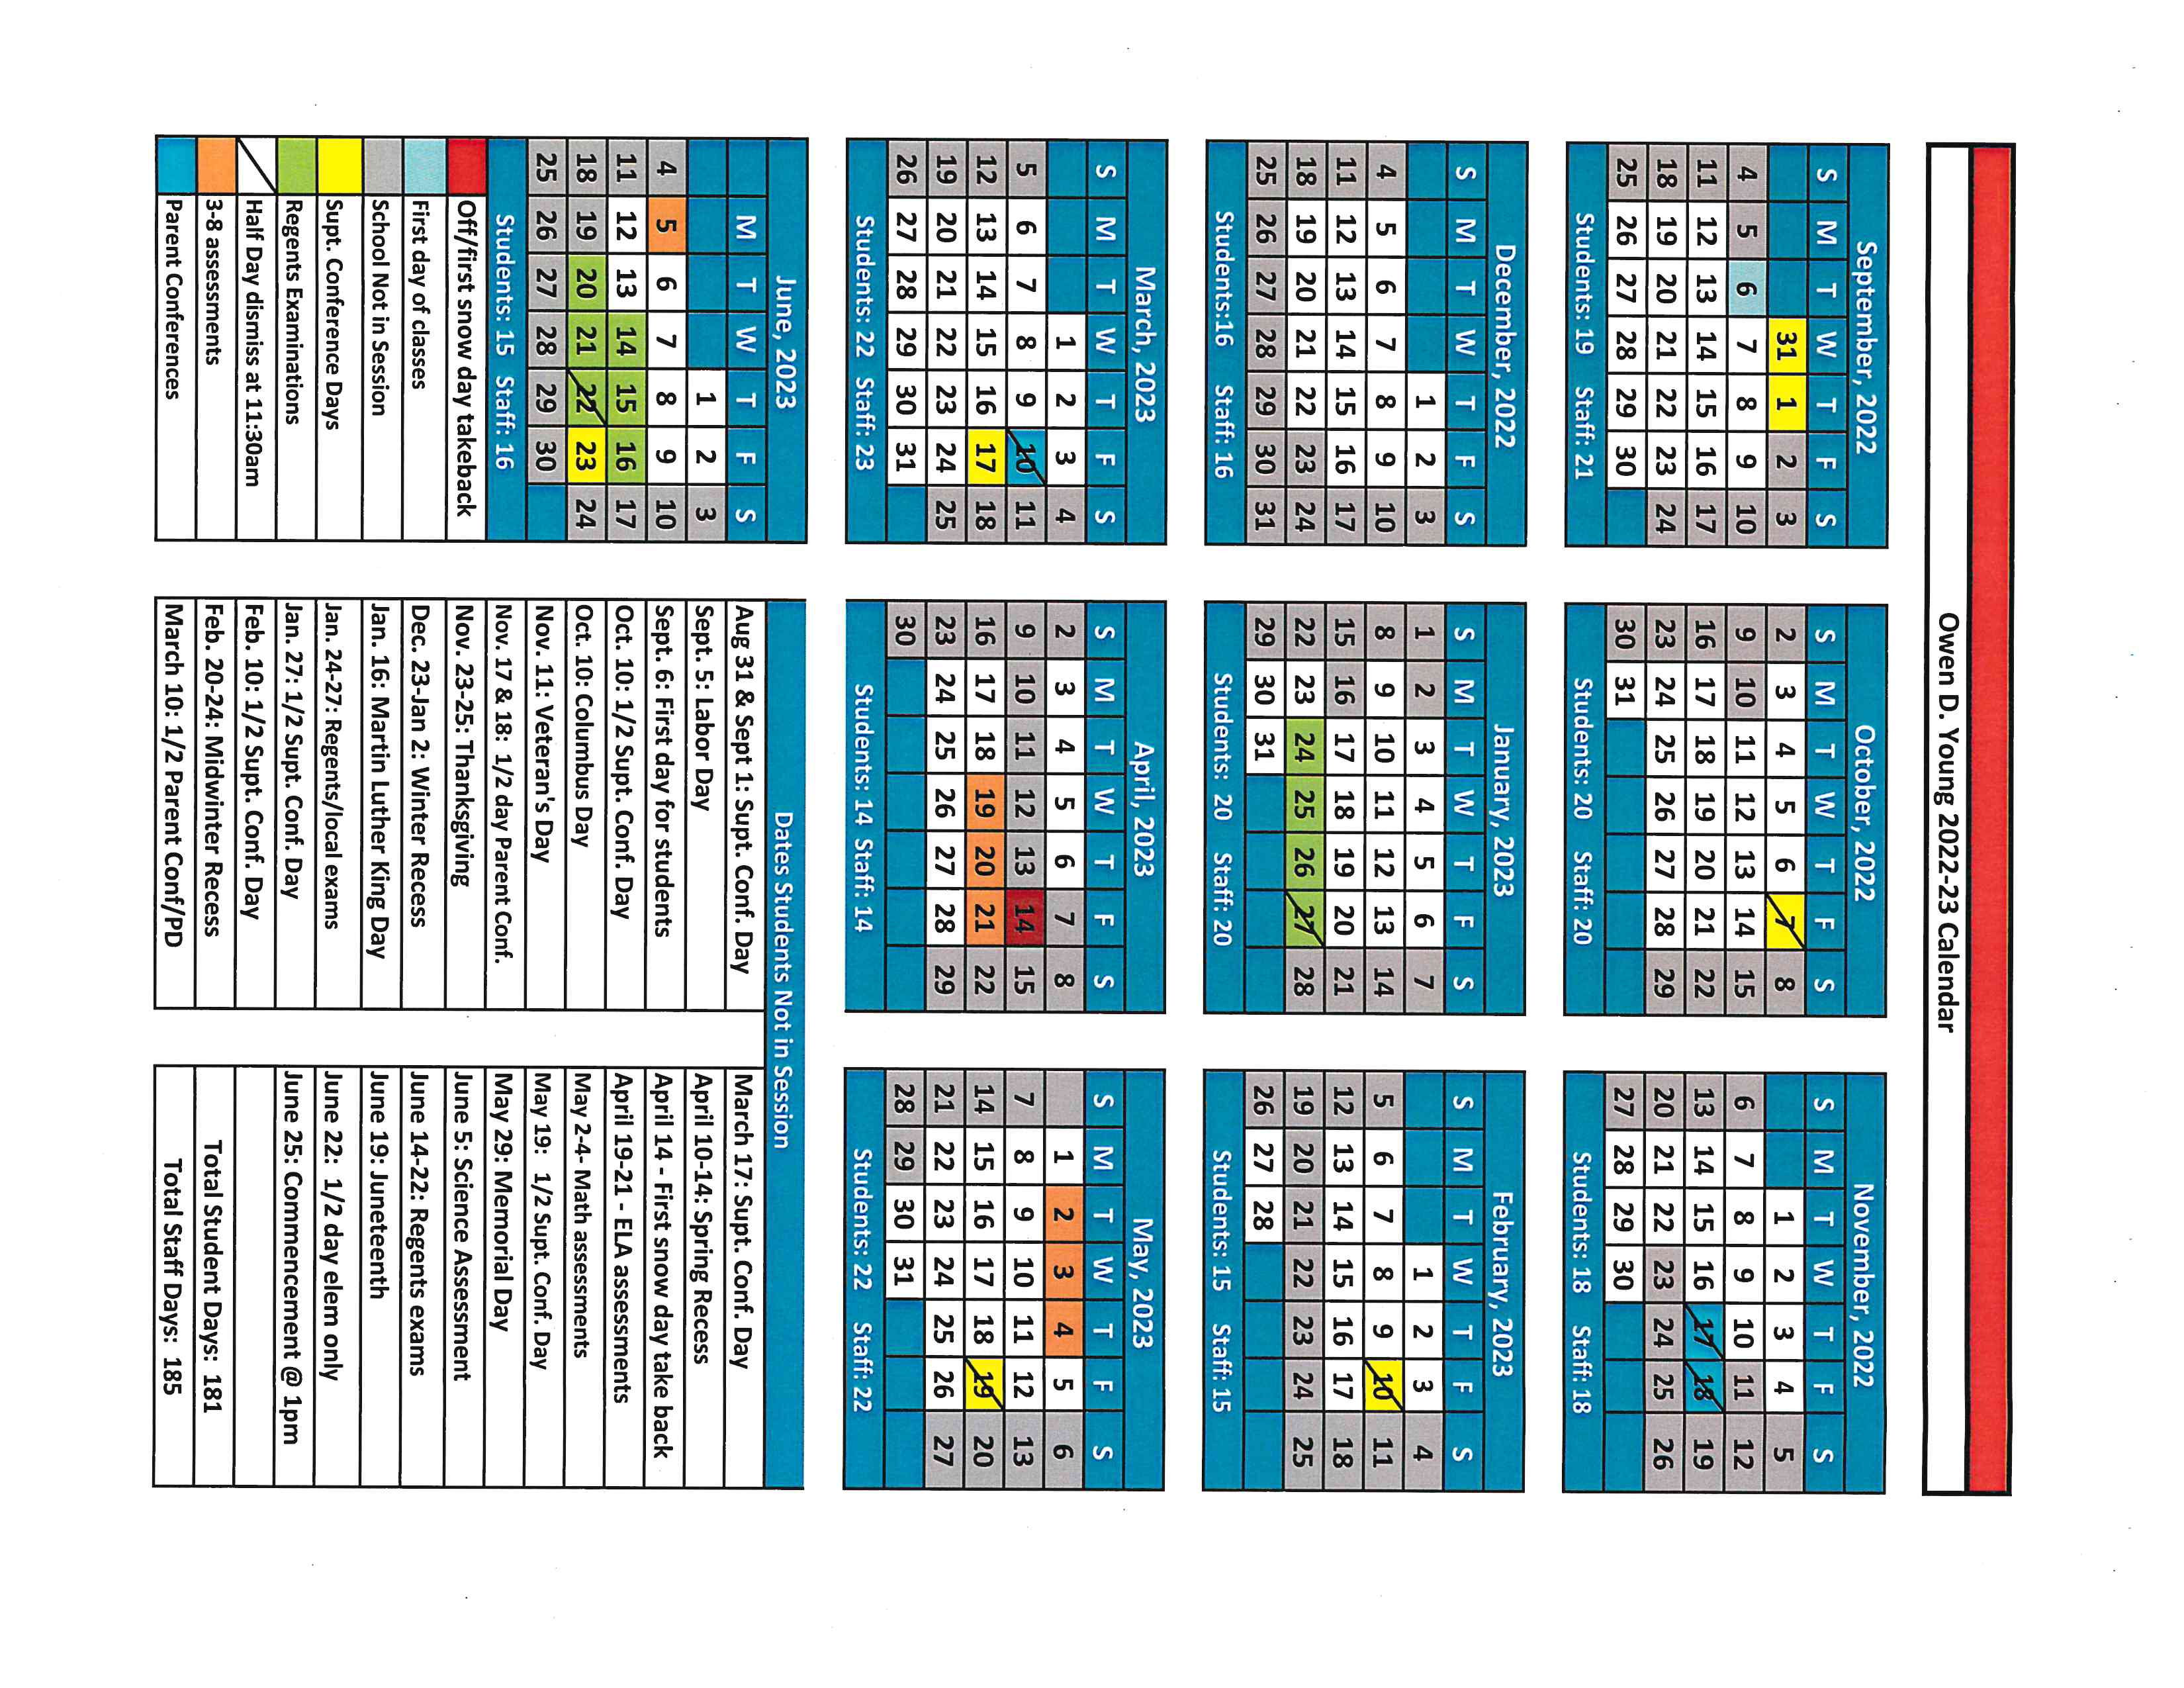 a color coded calendar shows the 2022-23 school year